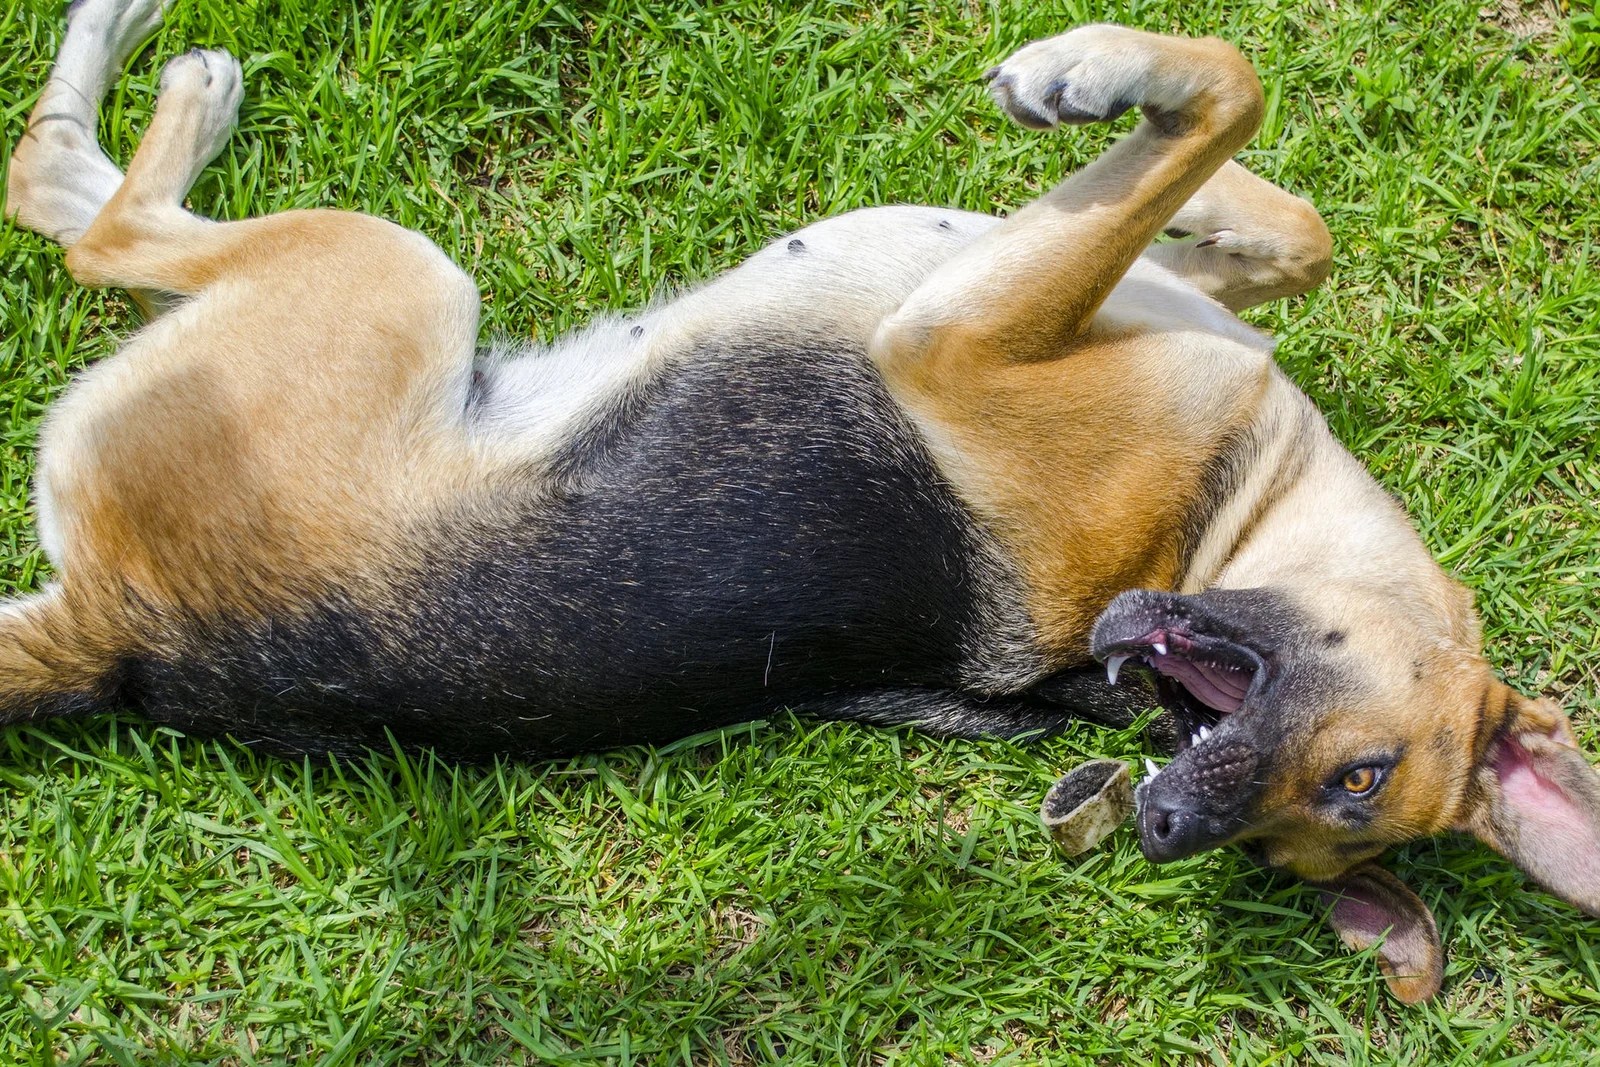 Seizures in Dogs Causes, Symptoms, & How to Treat